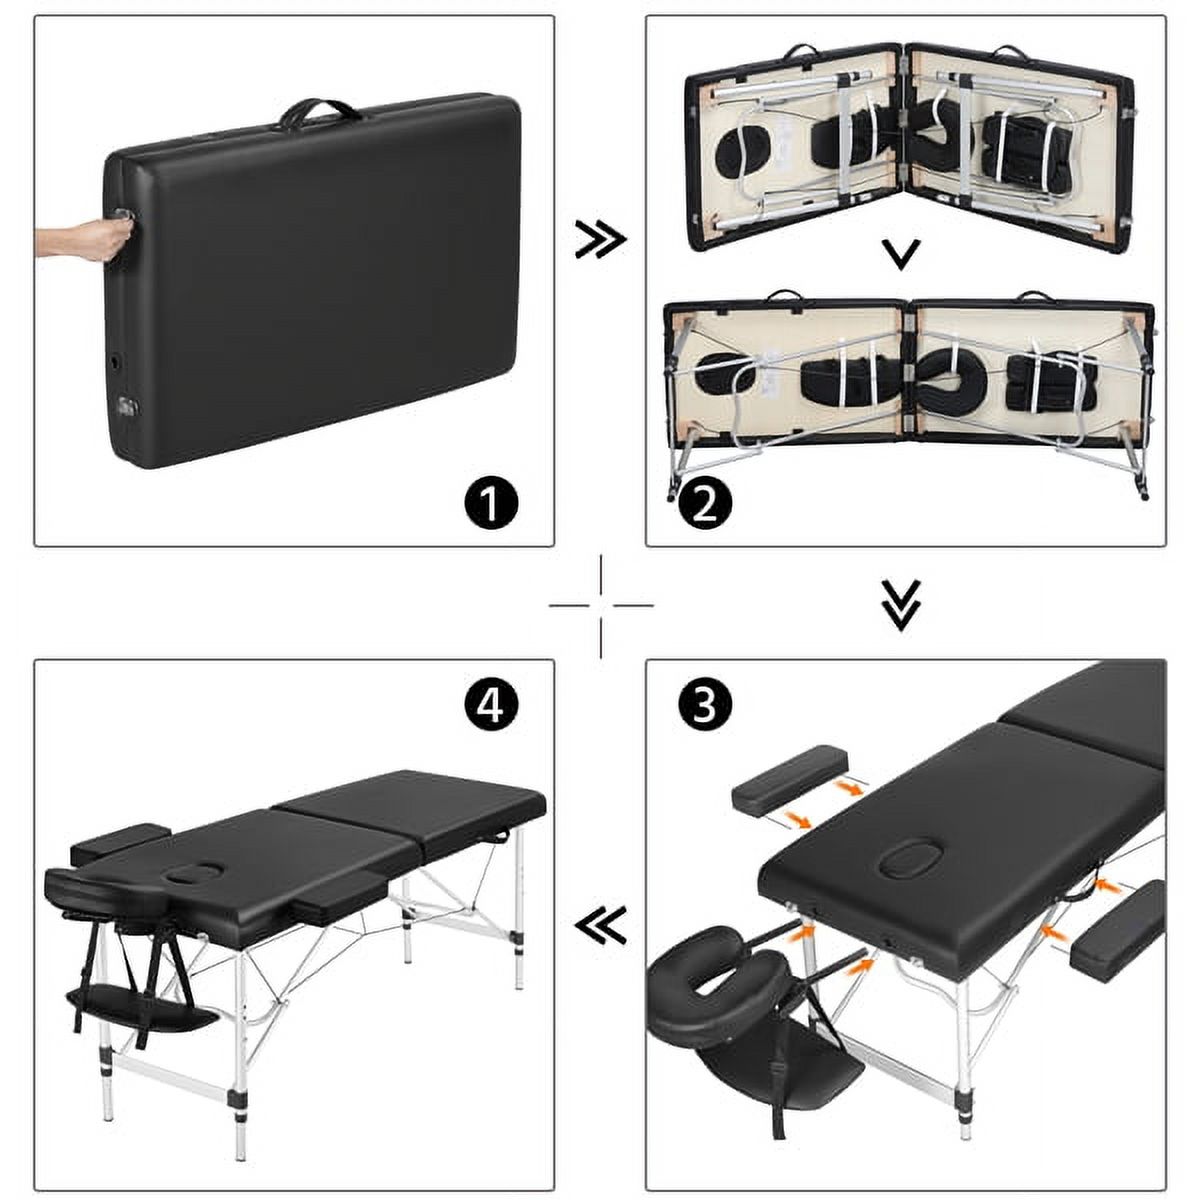 SmileMart 3 Section 84" Portable Adjustable Aluminum  Massage Table for Spa Treatments, Black - image 2 of 13